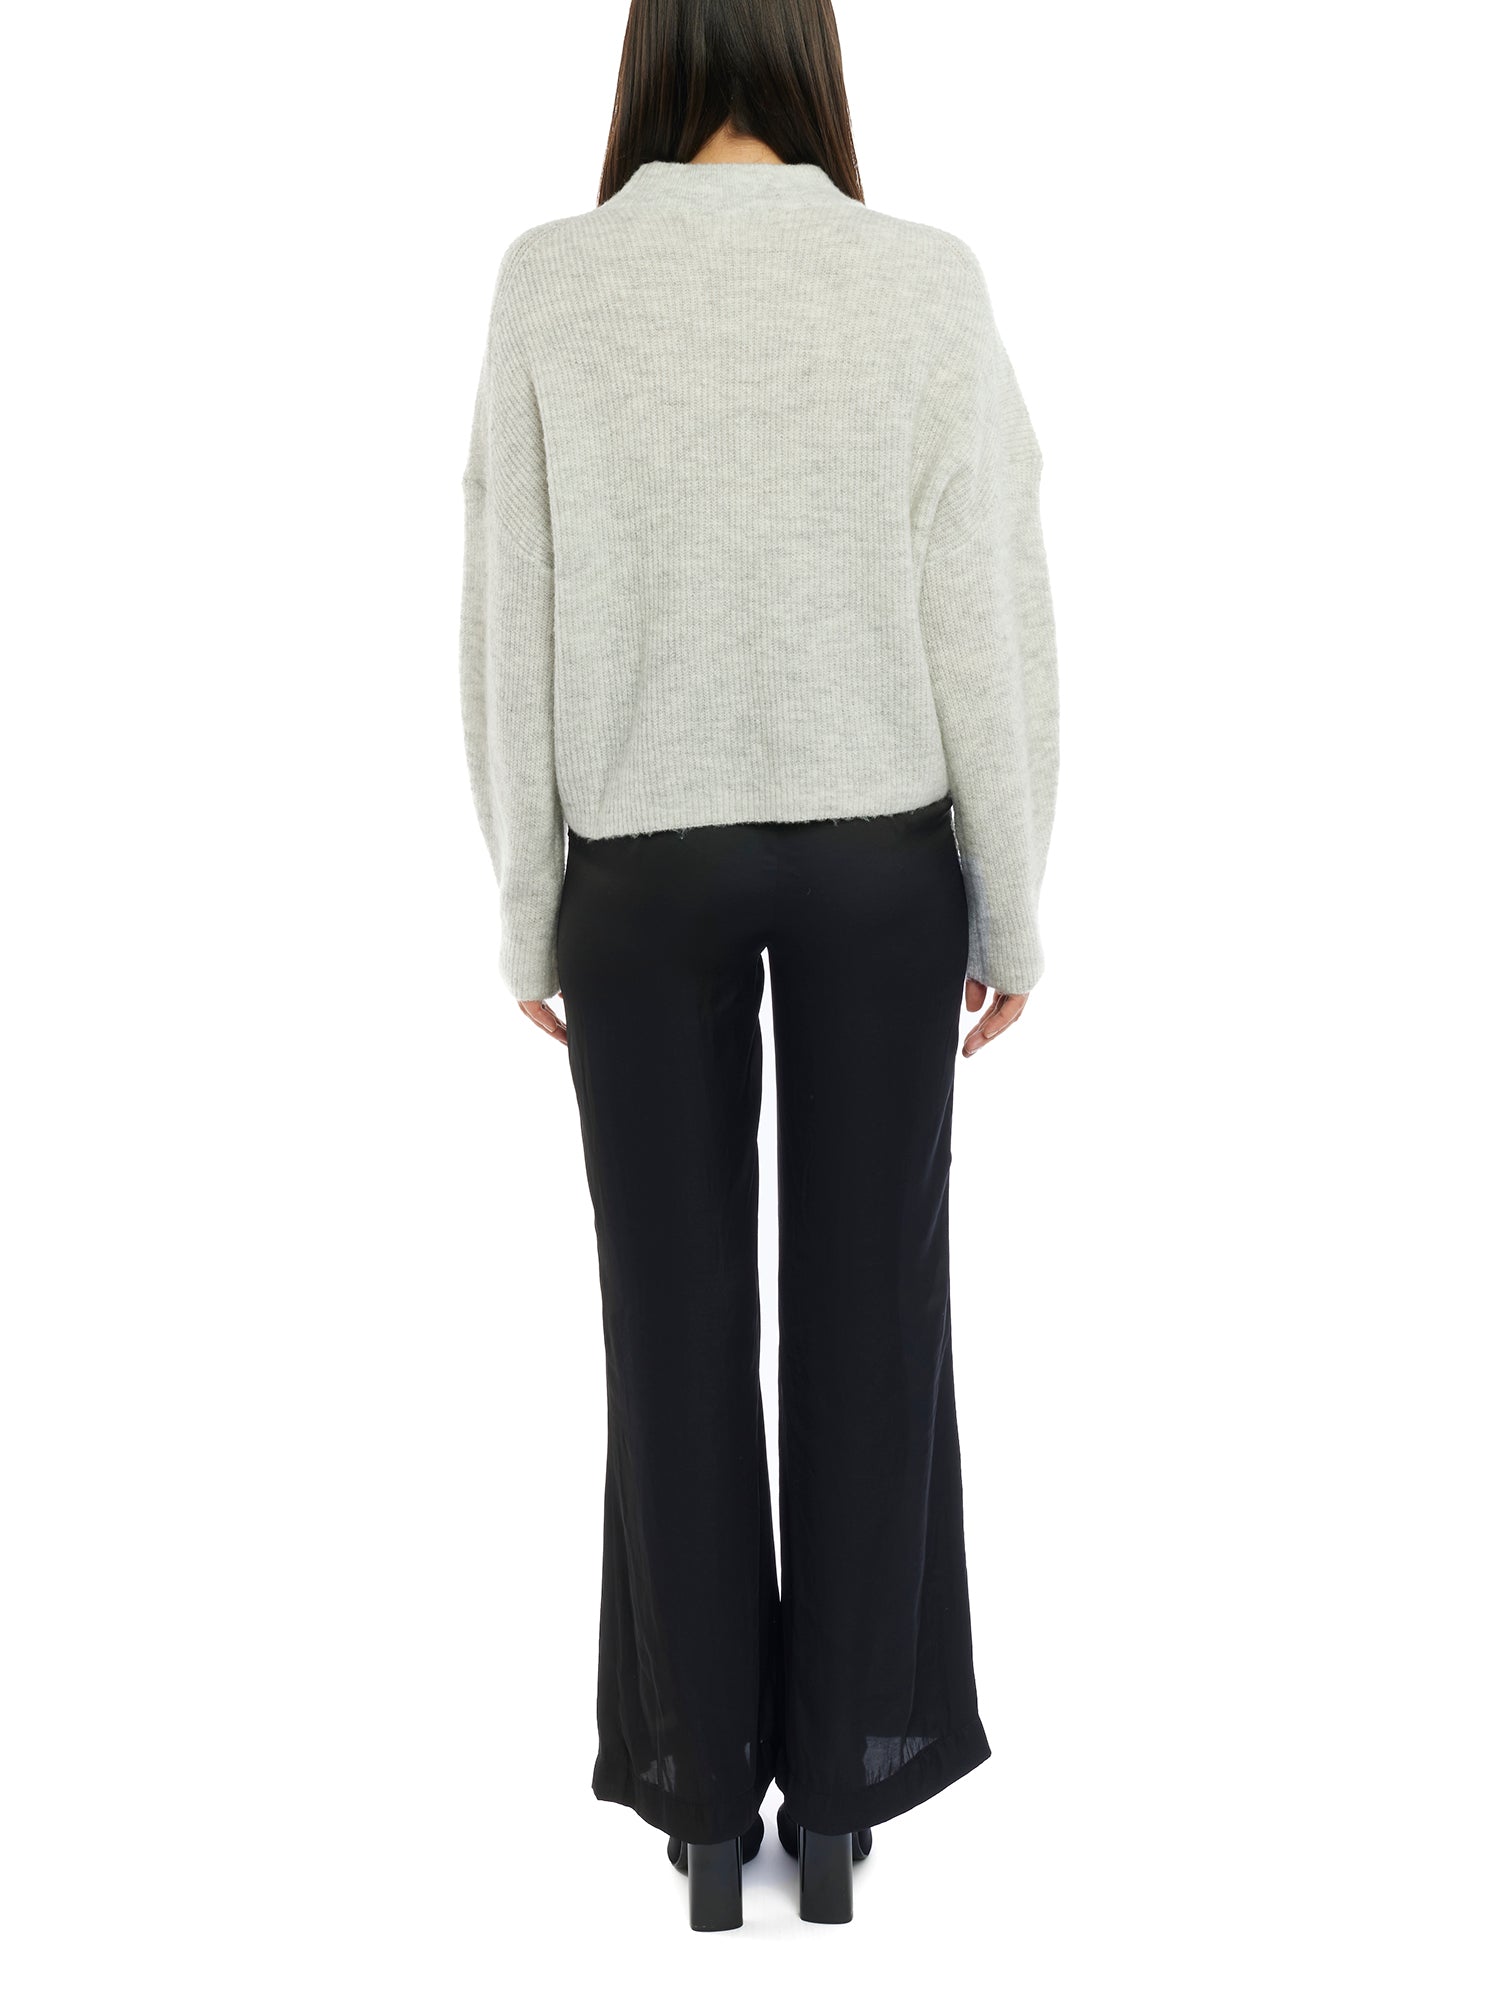 mock sweater features long sleeves and slightly cropped length in heather grey